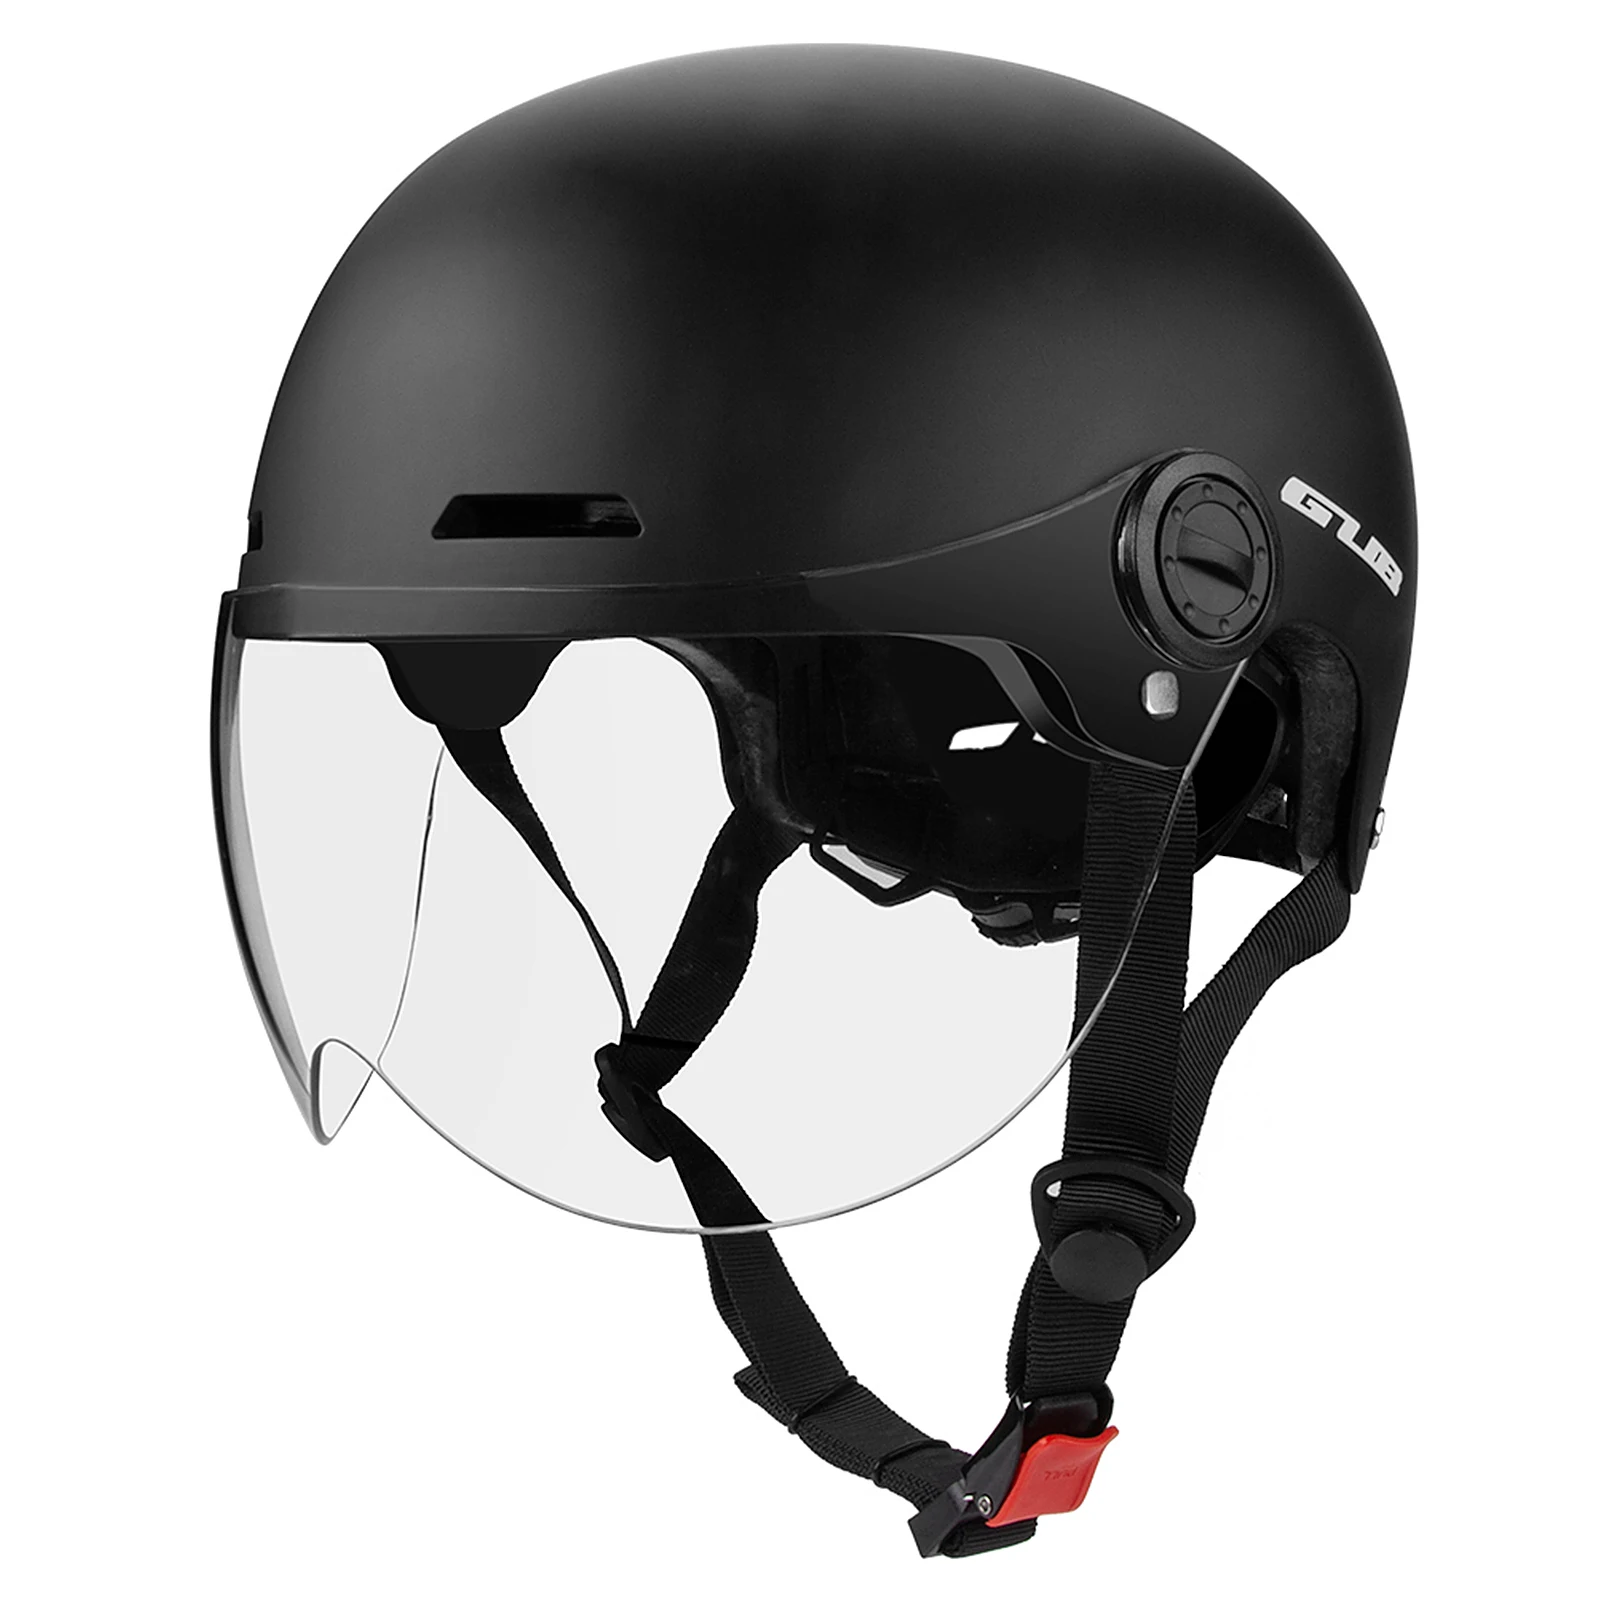 Bicycle Helmet with Removable Goggles for Men Women Commuting Cycling Mt... - $246.29